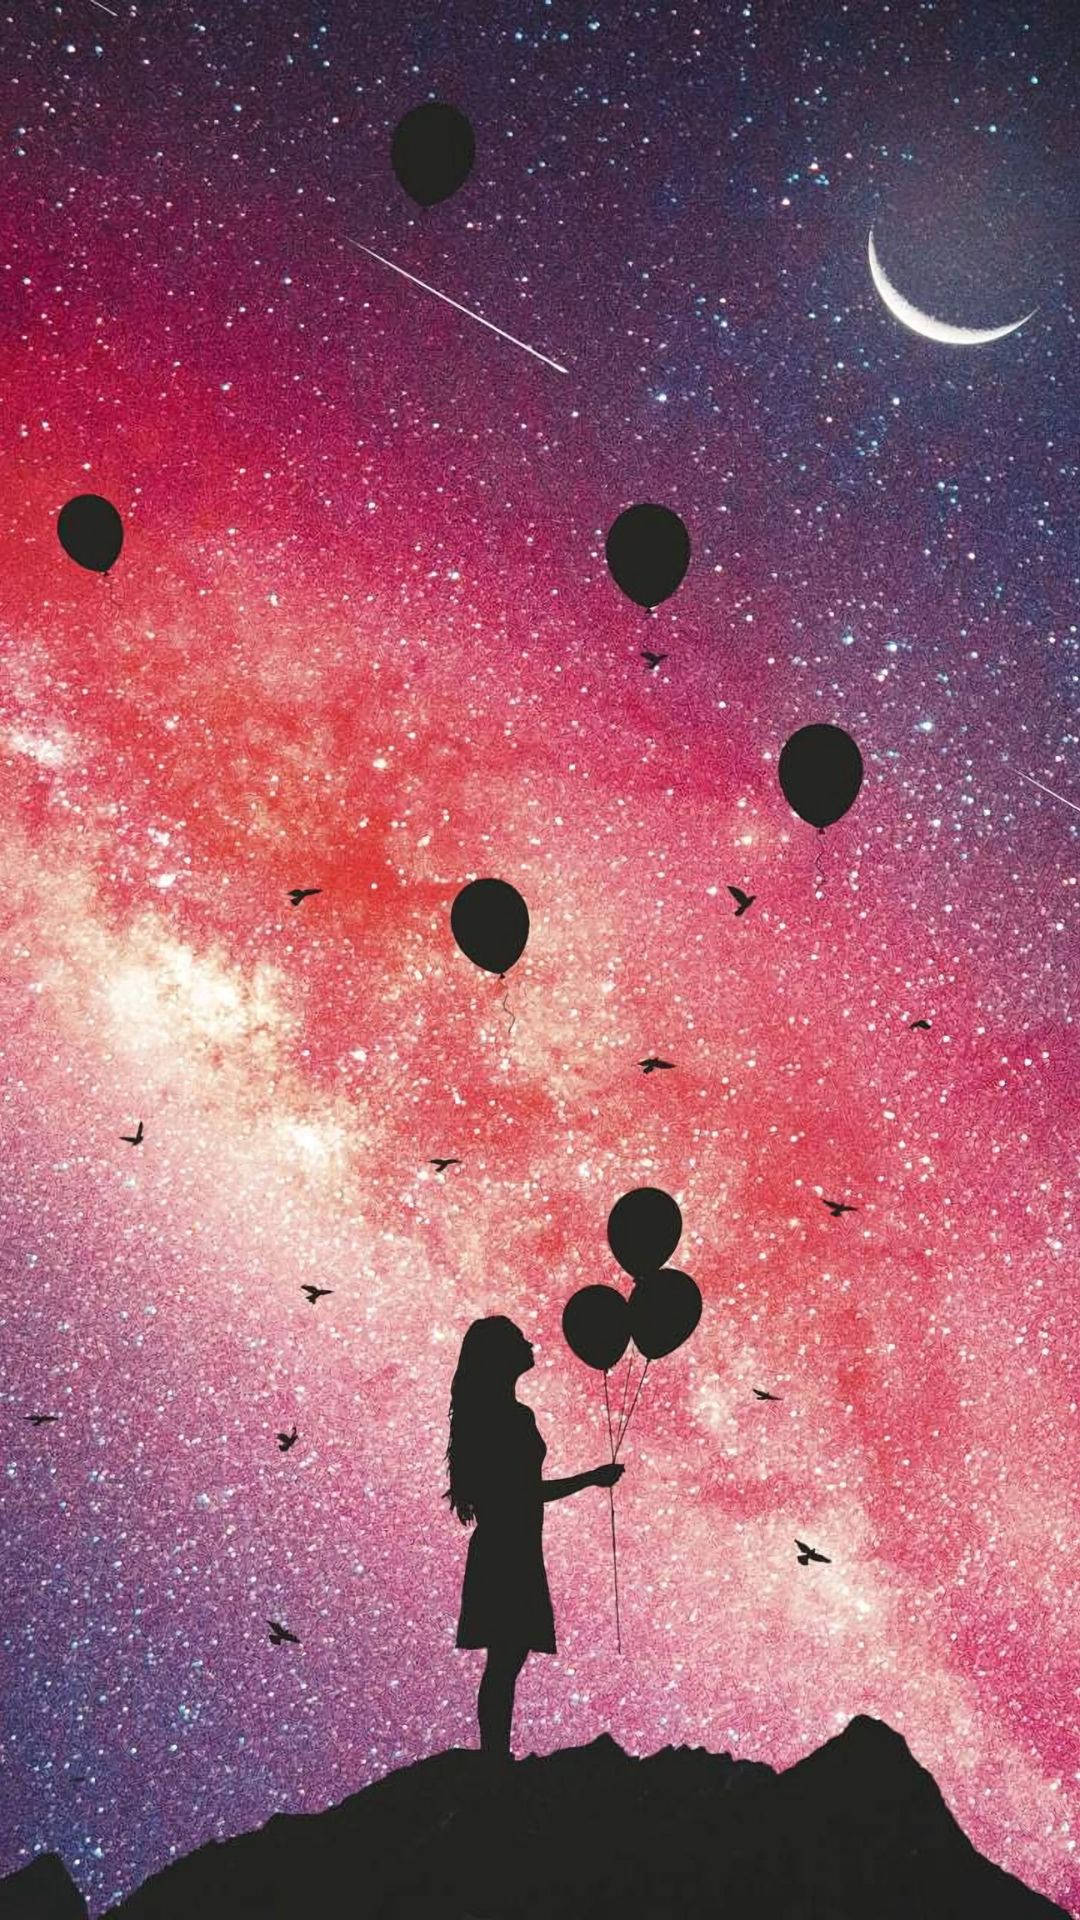 Girl Staring At Balloons In Cute Galaxy Background